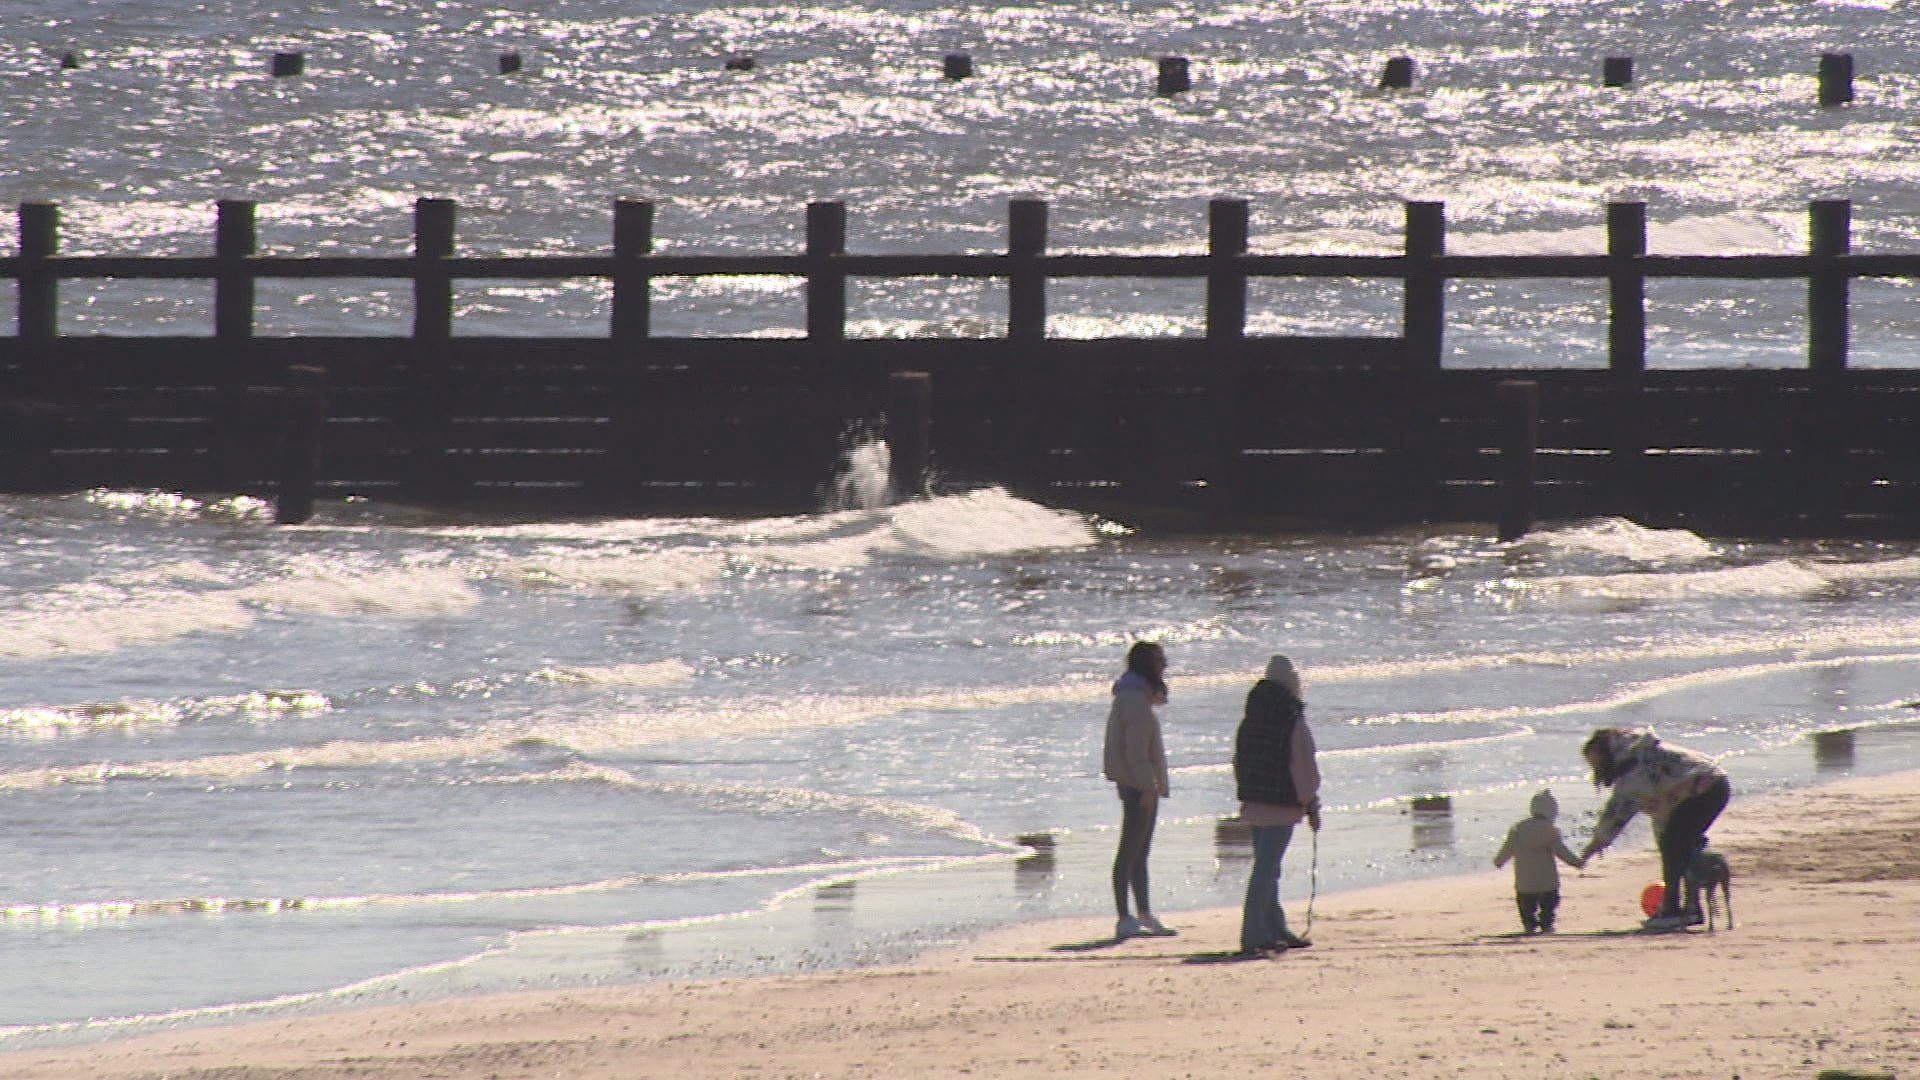 People enjoying the sun and sand in Aberdeen on Friday, April 16.